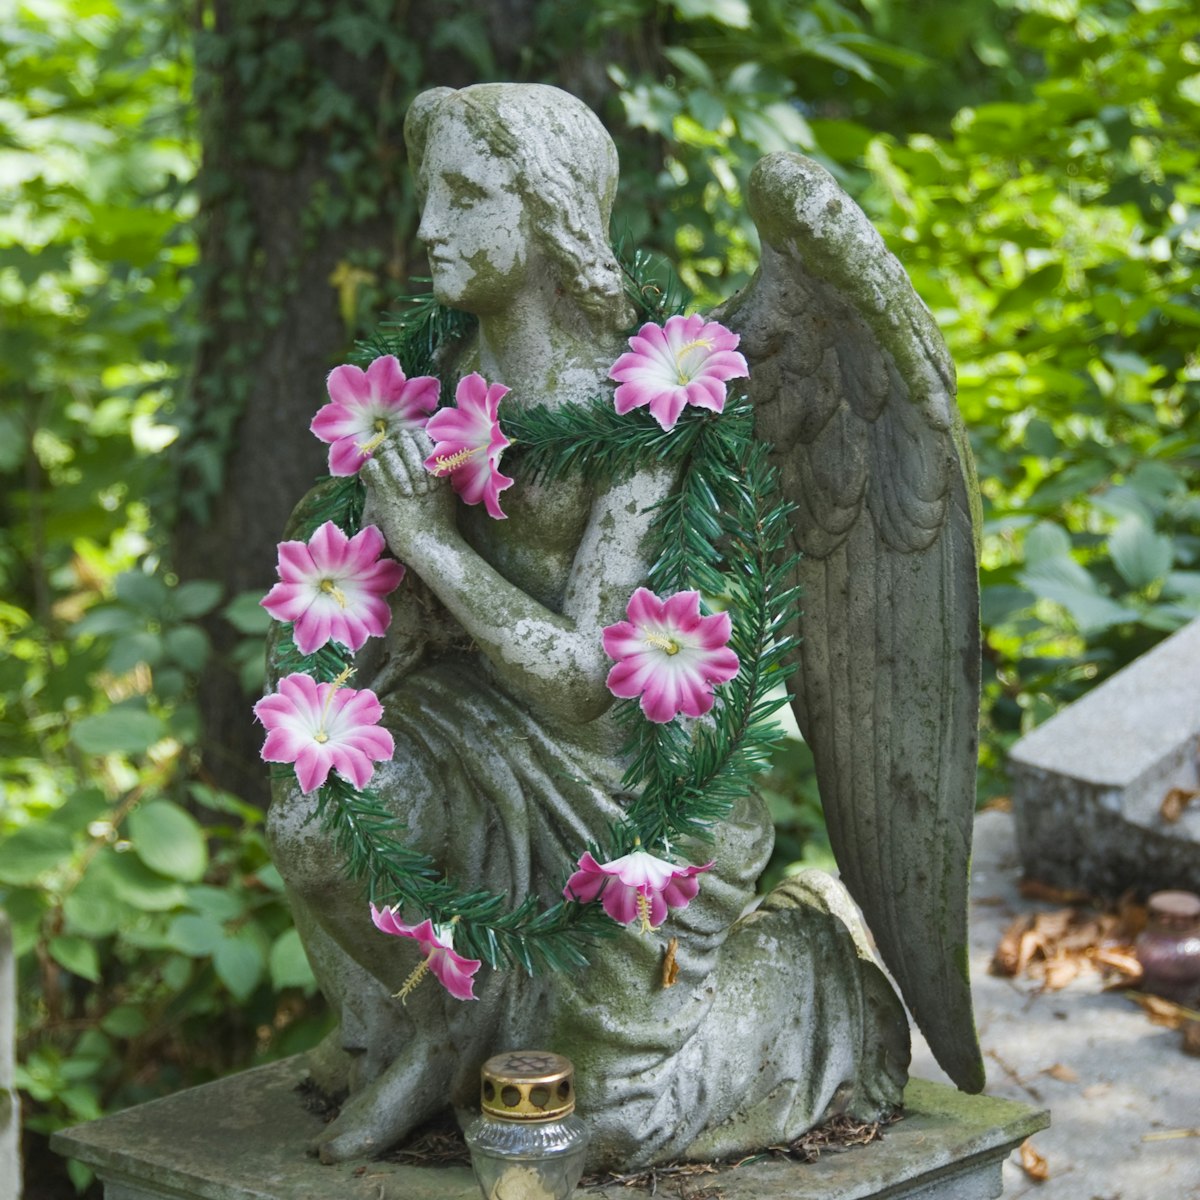 Artifical flowers decorating small winged angel statue on grave at Lychakivske Cemetery.